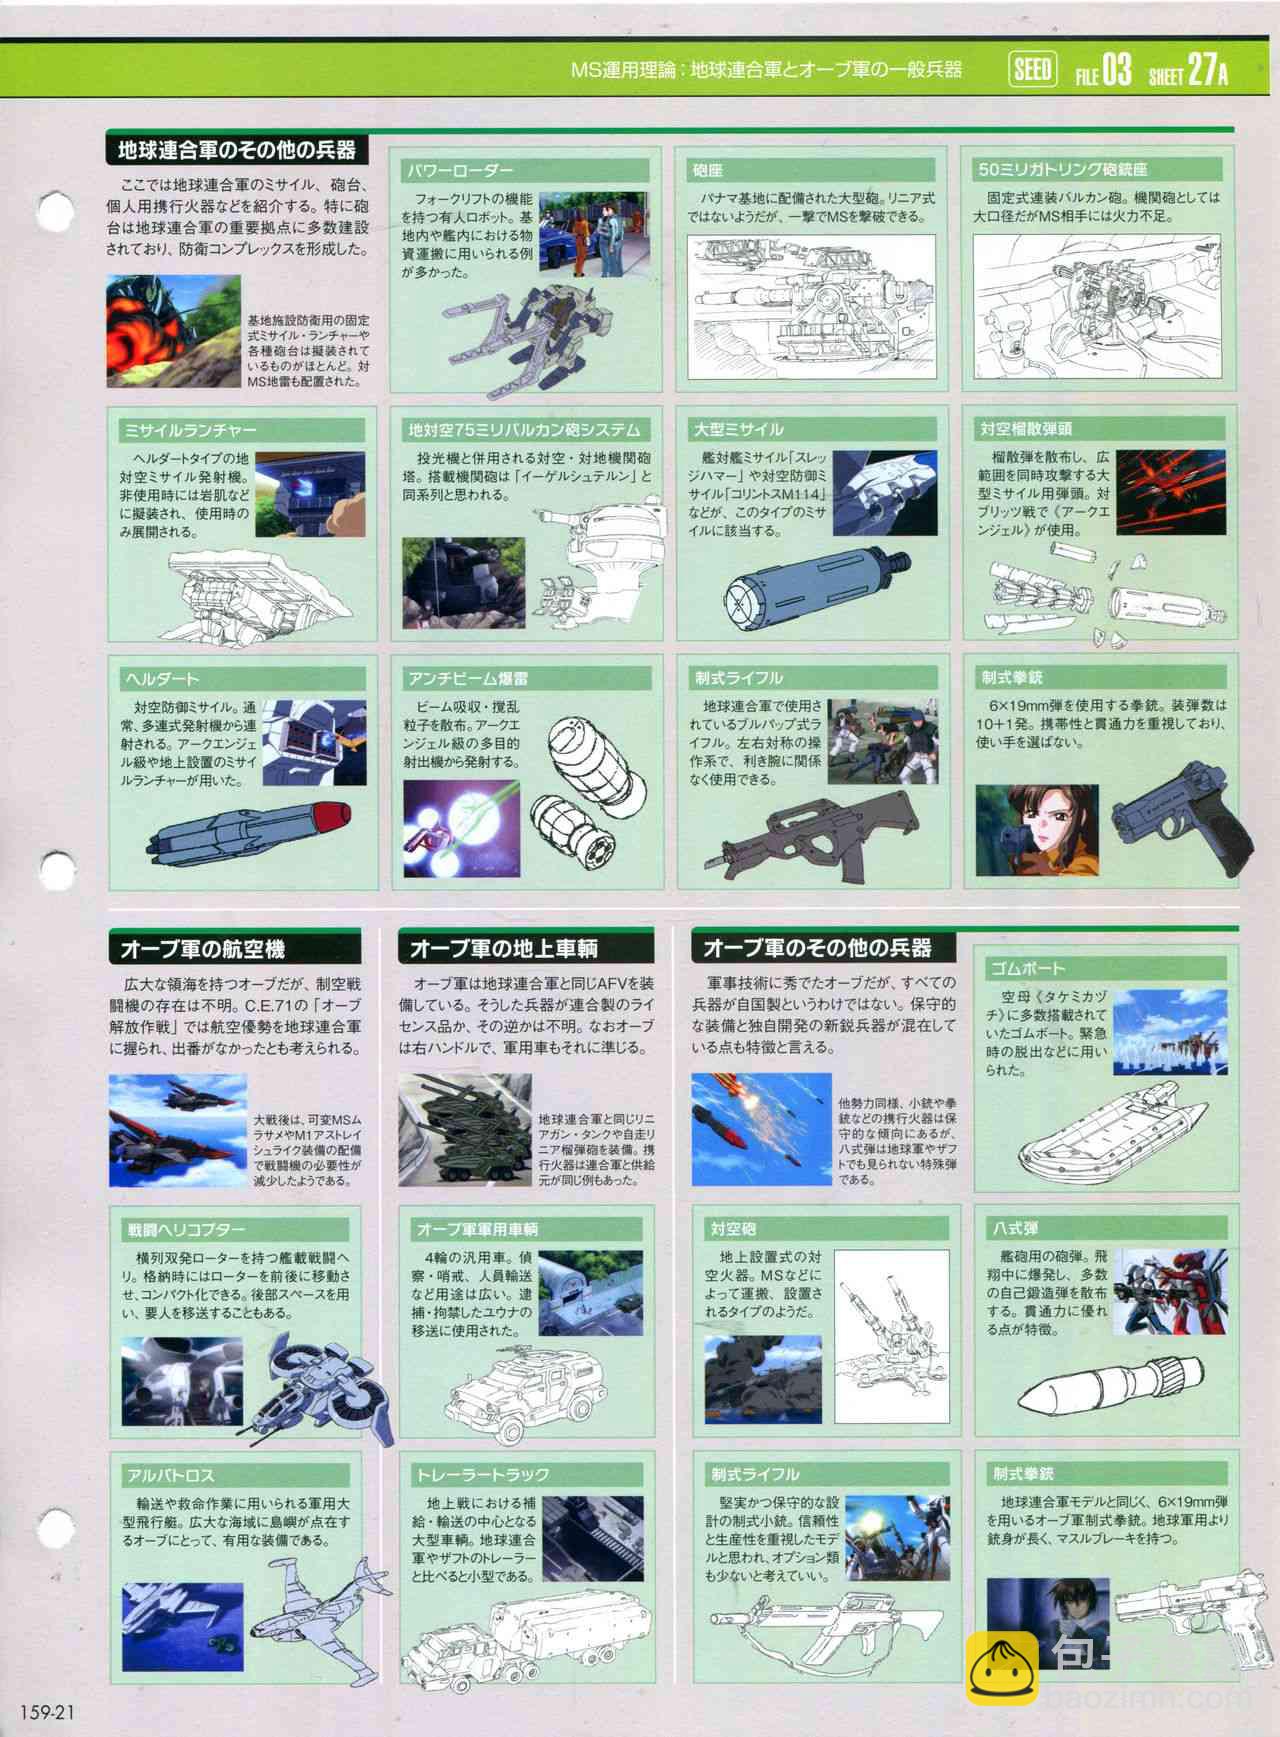 The Official Gundam Perfect File  - 159話 - 1